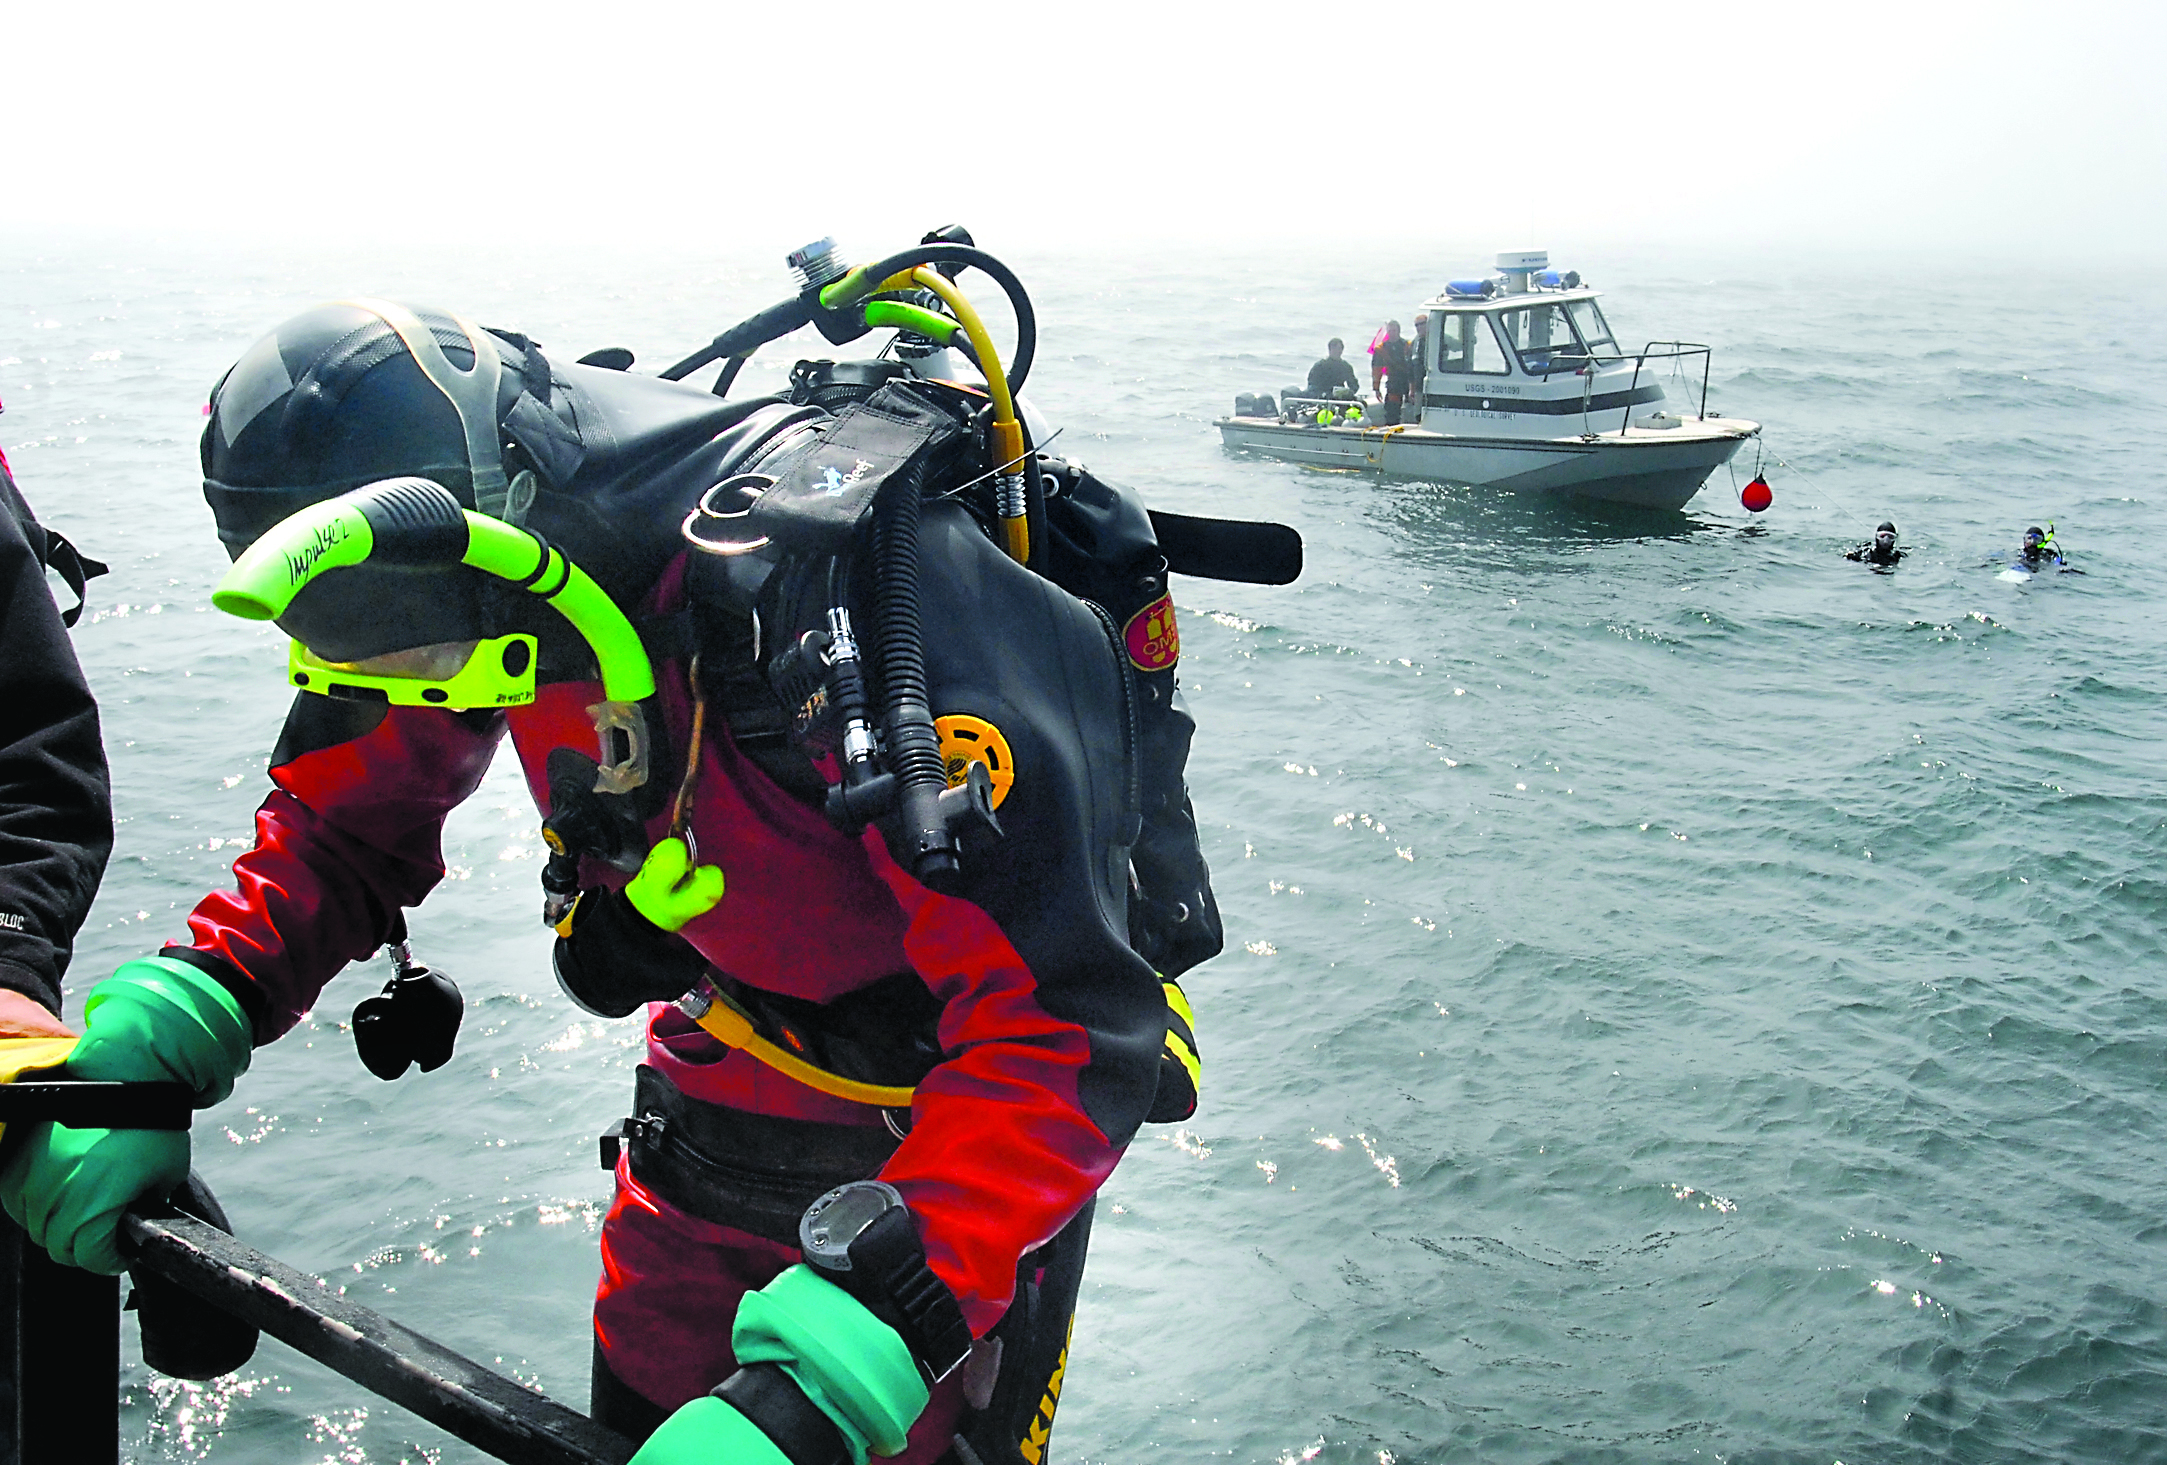 U.S. Environmental Protection Agency diving officer Sean Sheldrake prepares to enter the water as a dive team from the U.S. Geological Survey waits to meet up for a journey down to dive point “Charlie 2” in Freshwater Bay